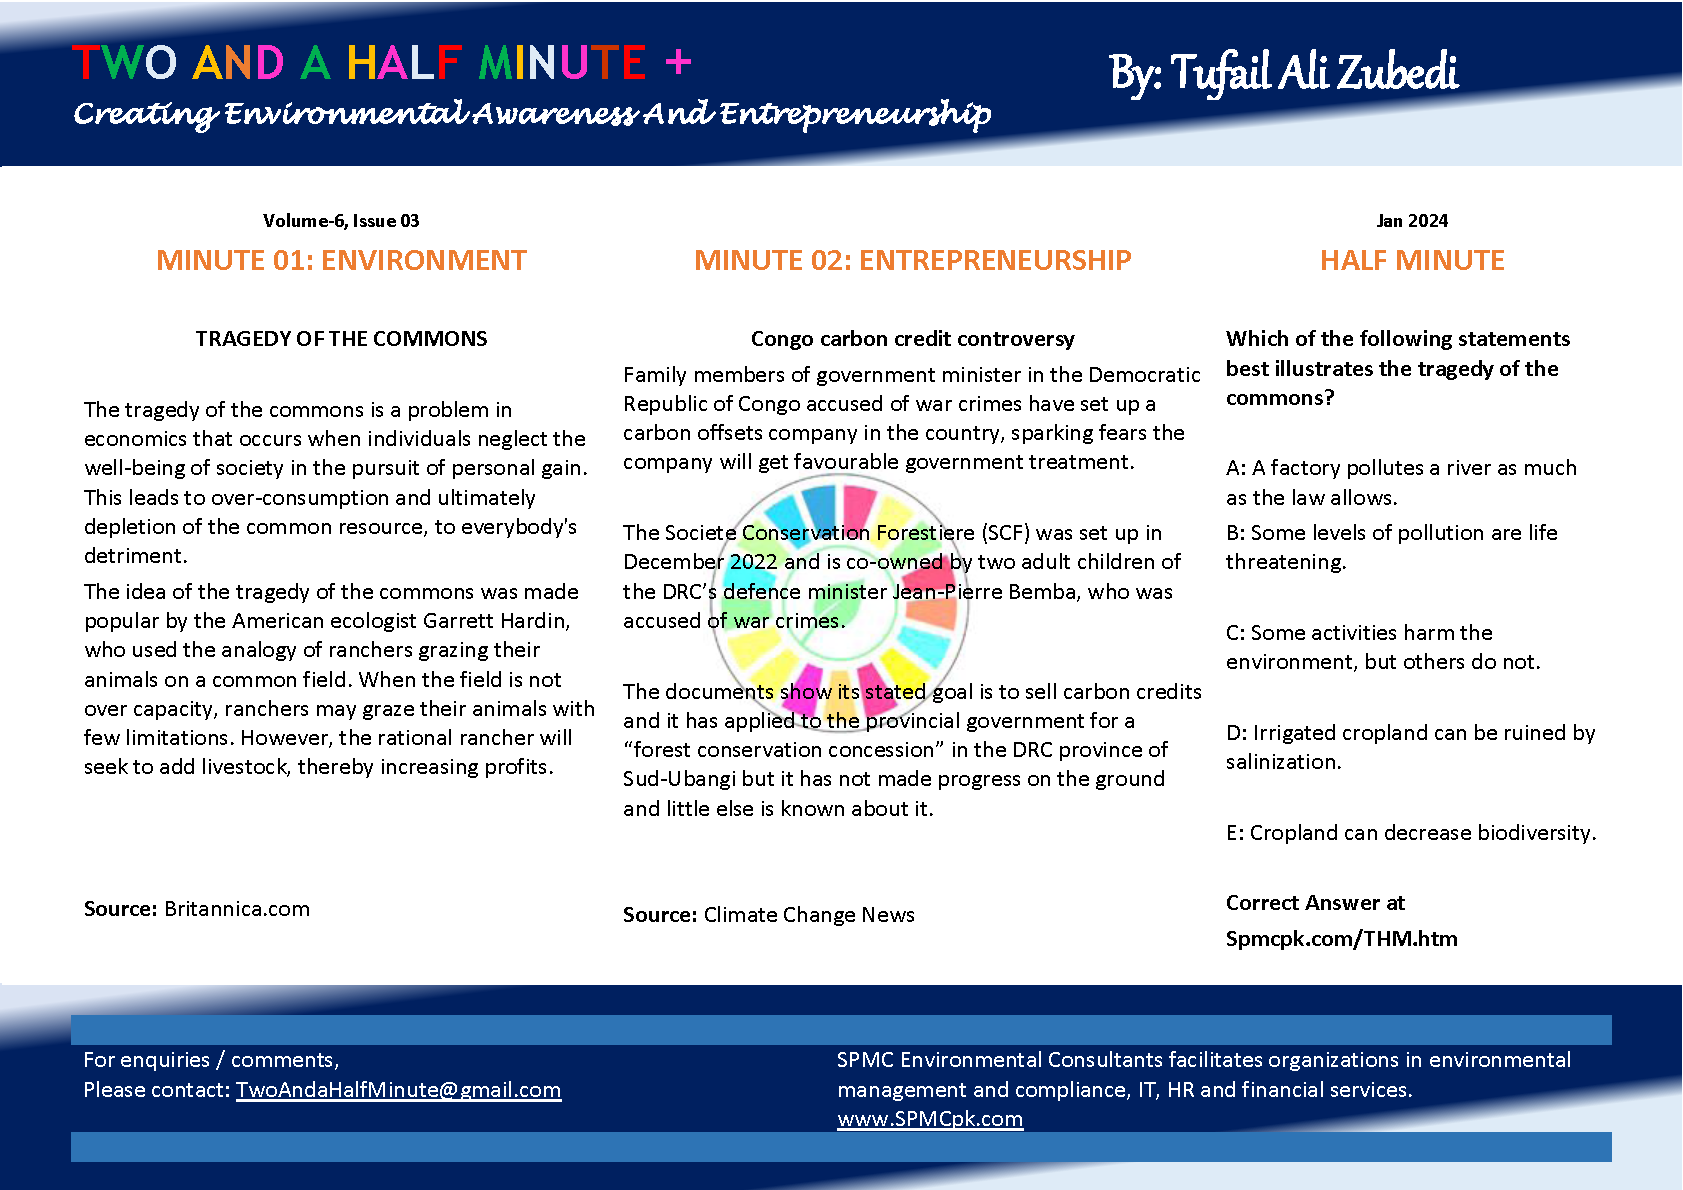 Two And a Half Minute by Tufail Ali Zubedi / SPMC consultants